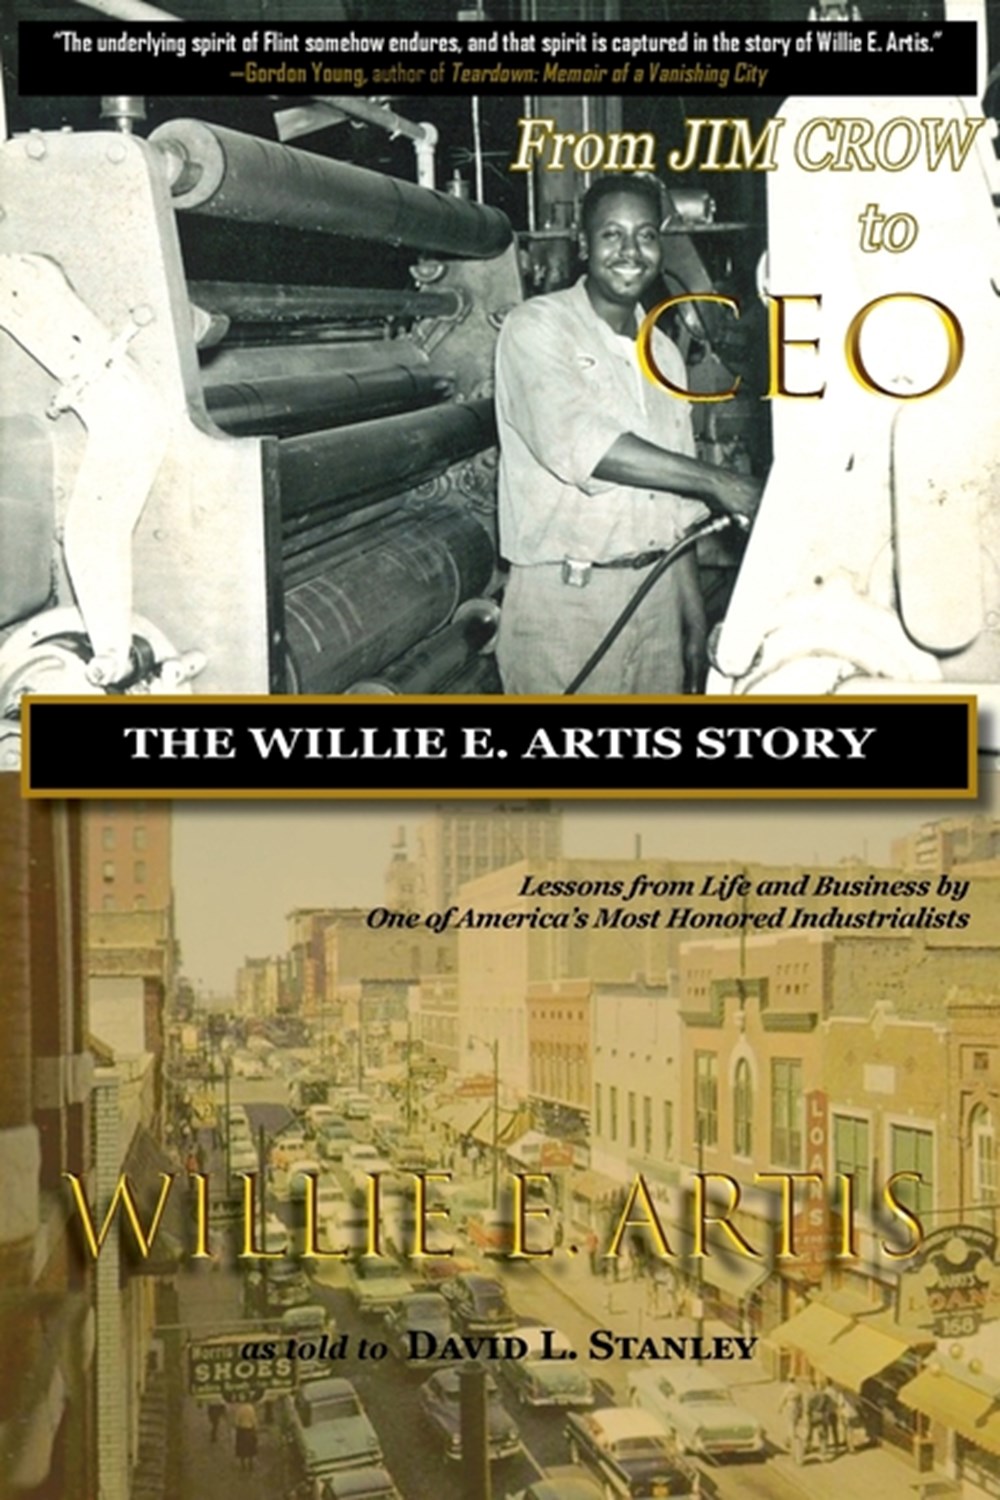 From Jim Crow to CEO The Willie E. Artis Story